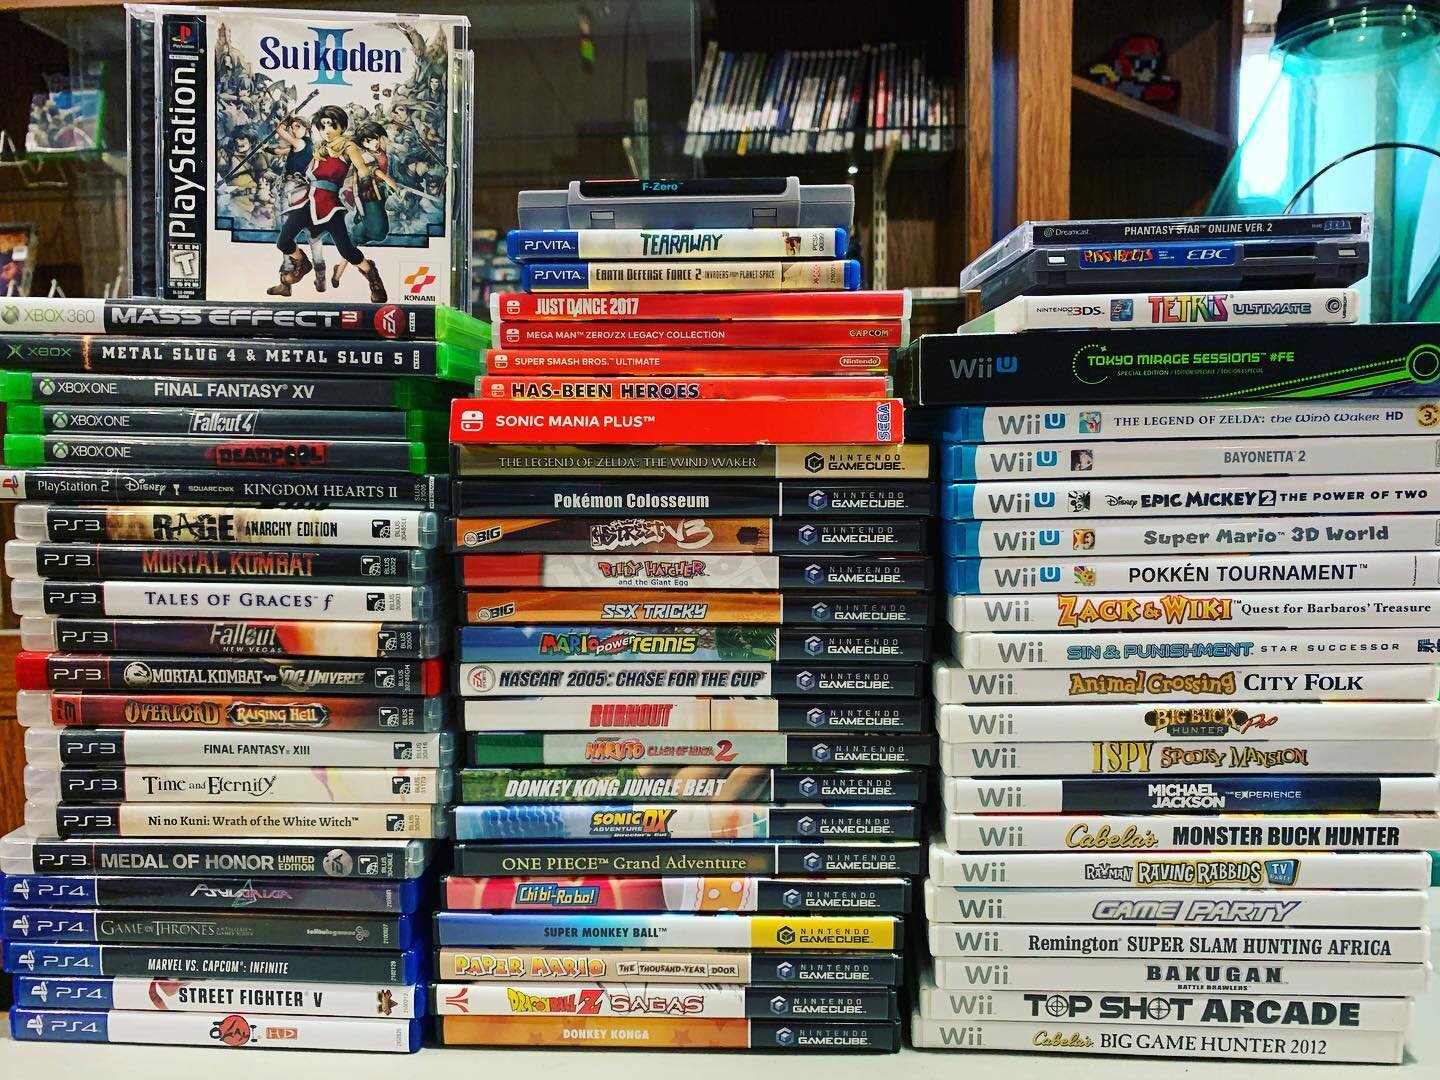 New inventory being processed now! See you next weekend. 💗 #SuikodenII #ps3 #gamecube #NintendoSwitch #Wii #WiiU #FireEmblem #ps4 #XboxOne #PSVita #TheGoodStuff